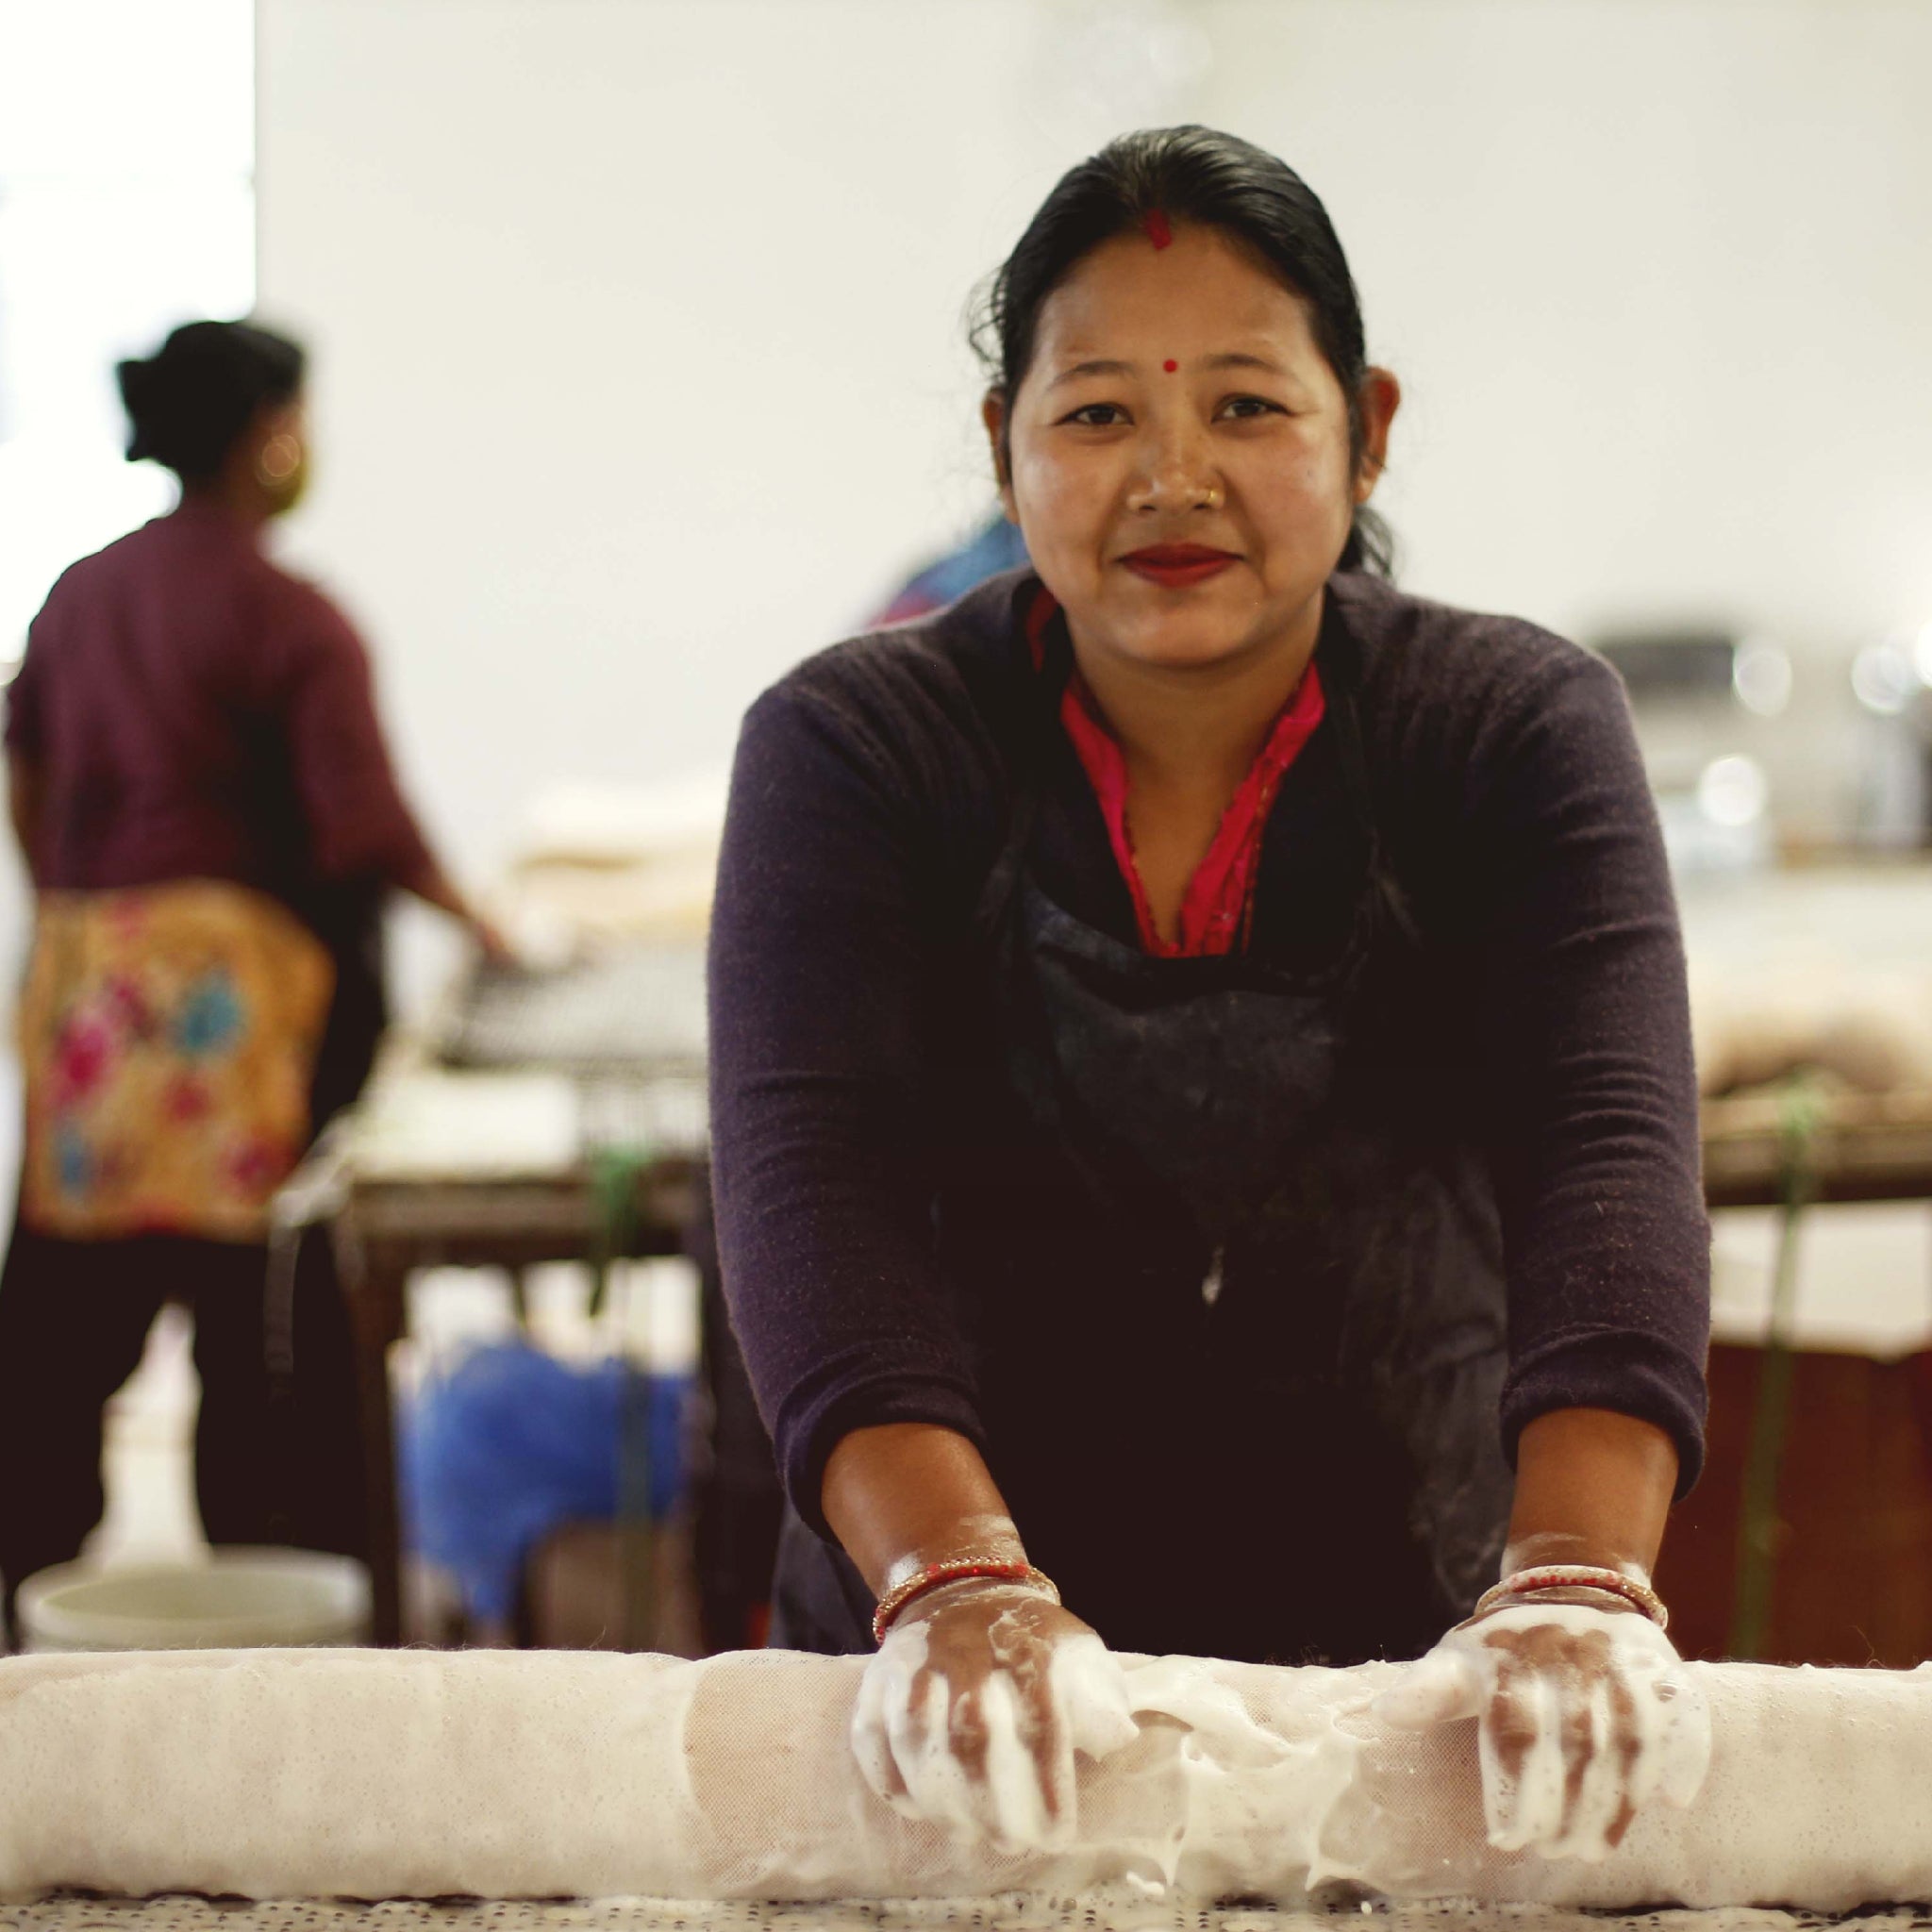 A Fairtrade craftswoman is rolling felt with soap to create fabric.